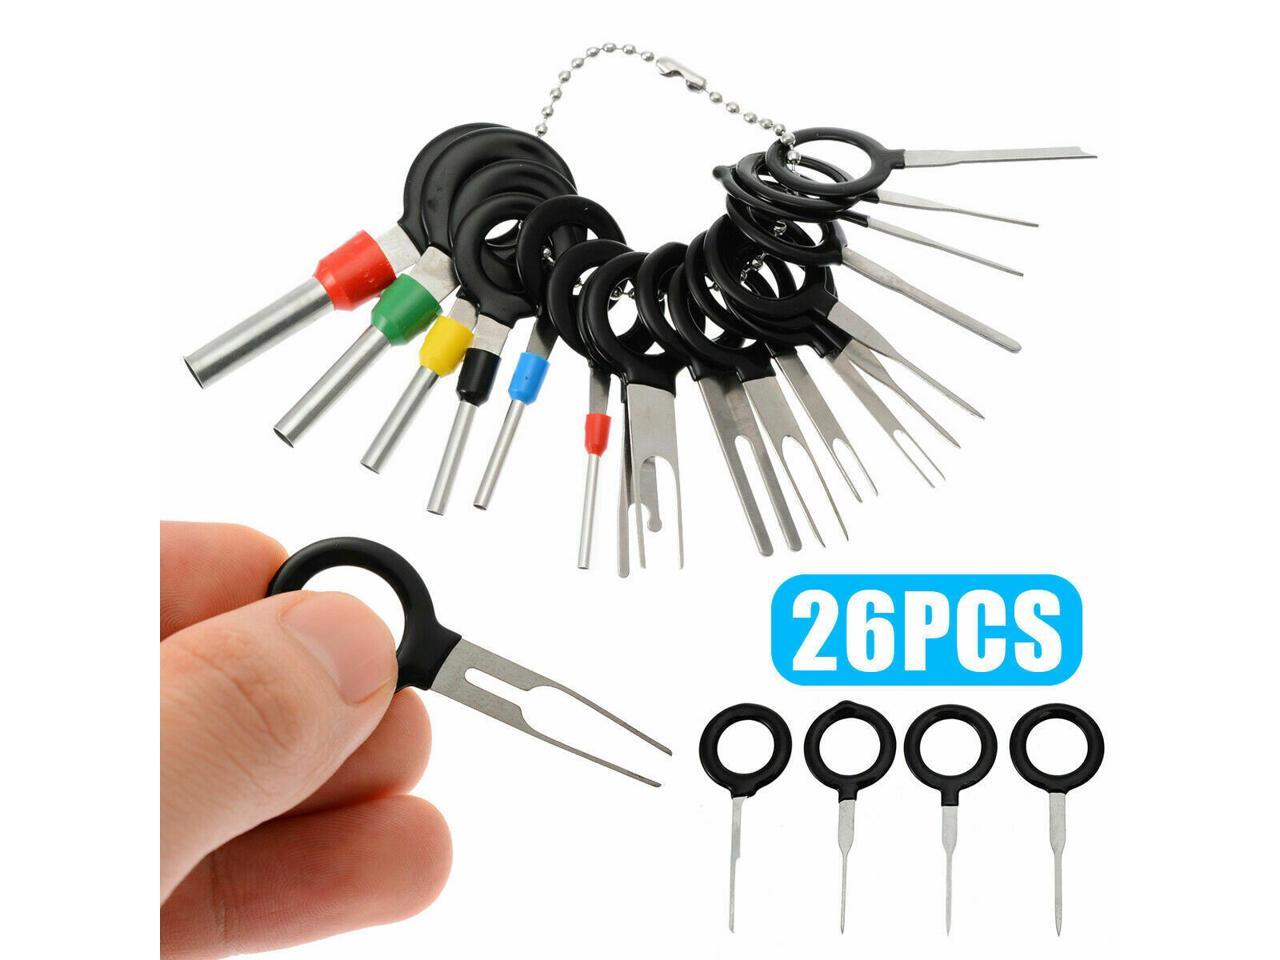 19x Car Terminal Extractor Remover Connector Crimp Pin Release Removal Tool Kit 